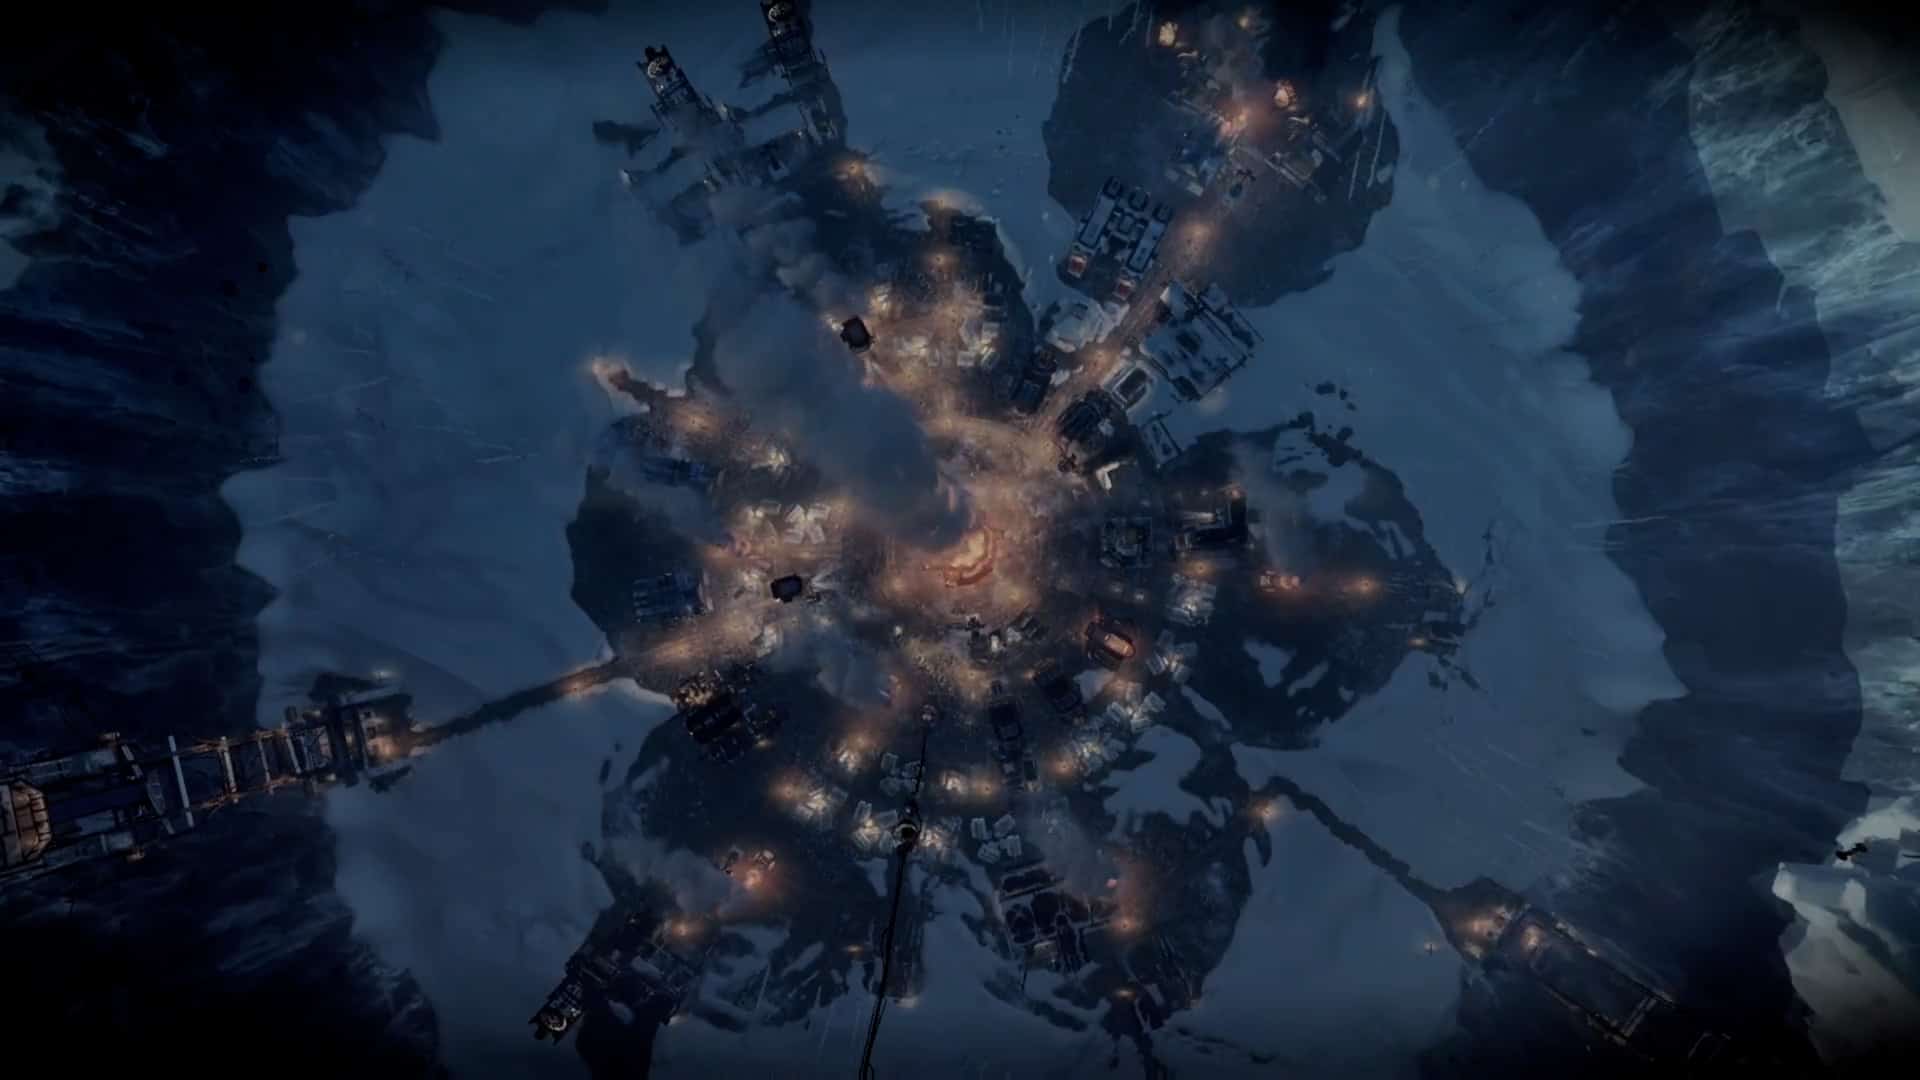 Ice ice baby: Frostpunk Game Review